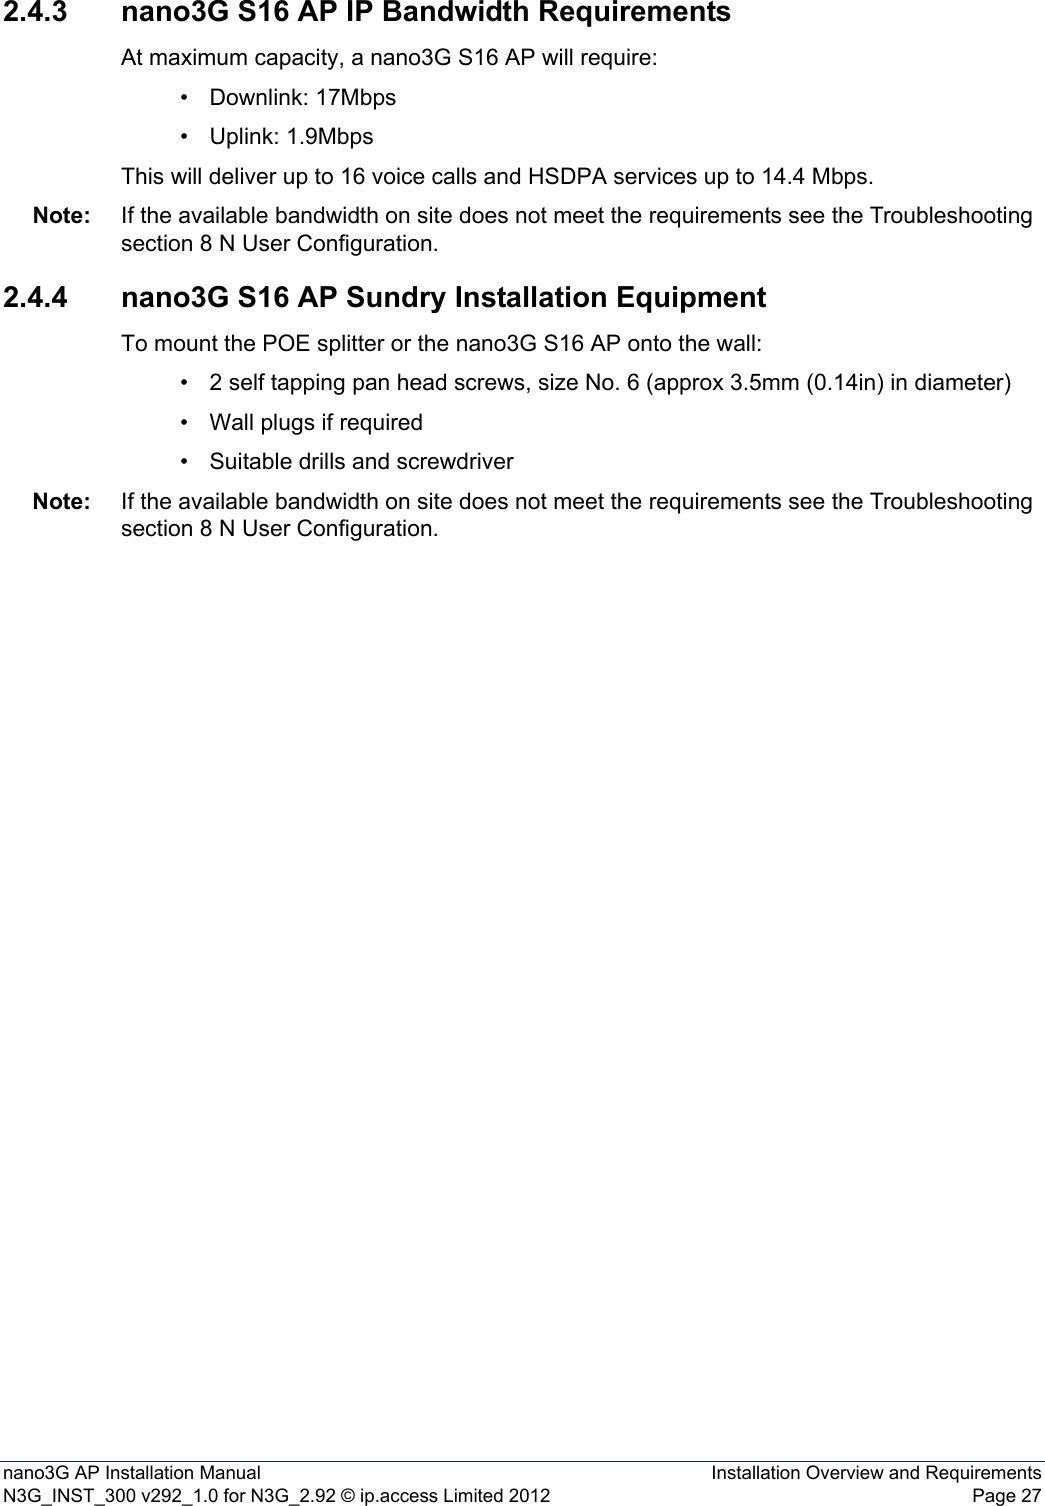 nano3G AP Installation Manual Installation Overview and RequirementsN3G_INST_300 v292_1.0 for N3G_2.92 © ip.access Limited 2012 Page 272.4.3 nano3G S16 AP IP Bandwidth RequirementsAt maximum capacity, a nano3G S16 AP will require:• Downlink: 17Mbps• Uplink: 1.9MbpsThis will deliver up to 16 voice calls and HSDPA services up to 14.4 Mbps.Note: If the available bandwidth on site does not meet the requirements see the Troubleshooting section 8 N User Configuration.2.4.4 nano3G S16 AP Sundry Installation EquipmentTo mount the POE splitter or the nano3G S16 AP onto the wall:• 2 self tapping pan head screws, size No. 6 (approx 3.5mm (0.14in) in diameter)• Wall plugs if required• Suitable drills and screwdriverNote: If the available bandwidth on site does not meet the requirements see the Troubleshooting section 8 N User Configuration.